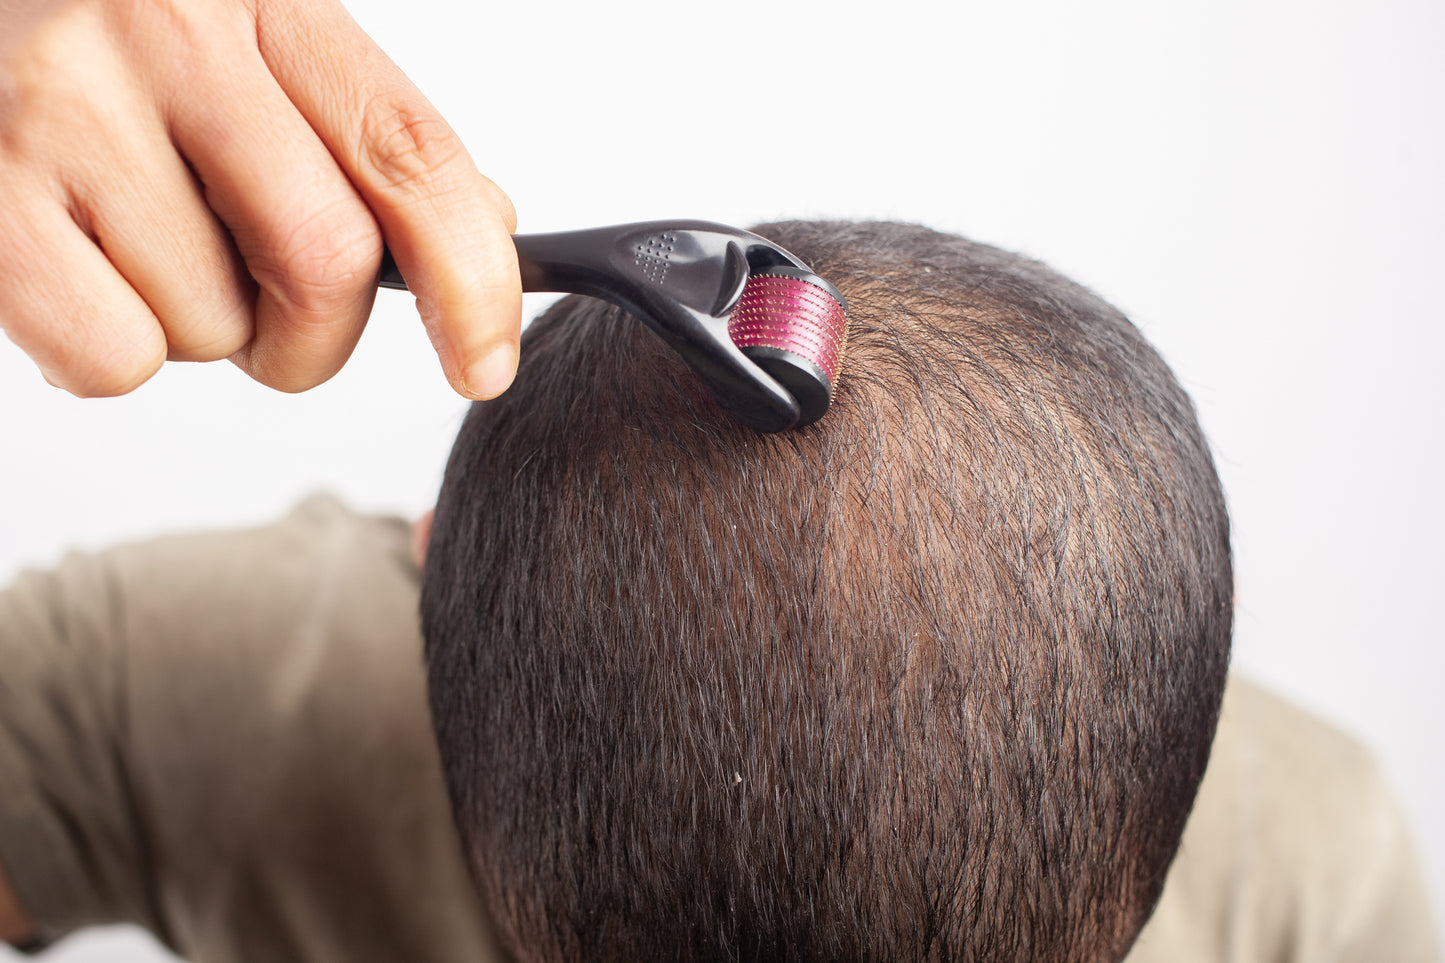 How Often Should You Use a Derma Roller for Hair Loss?